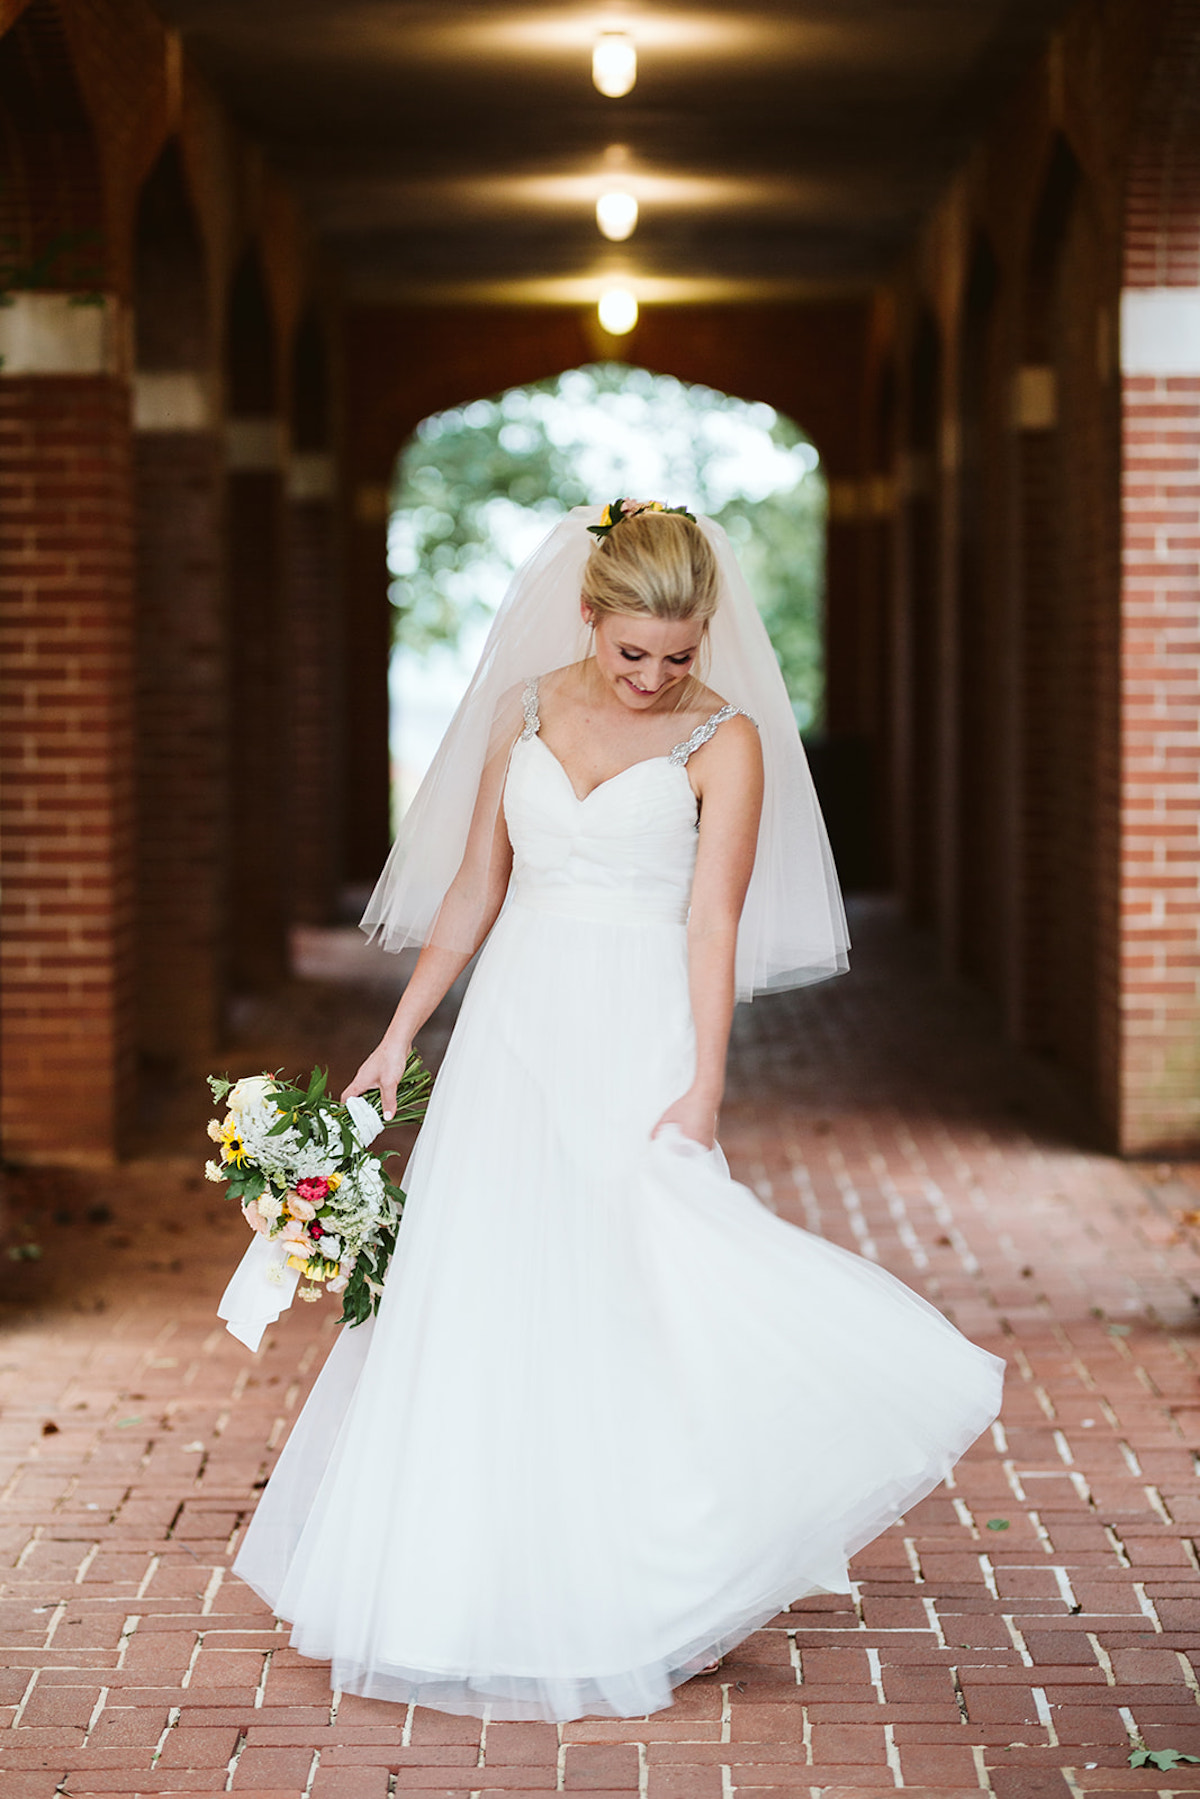 Bride stands in a covered, brick arched walkway holding her bouquet at her side